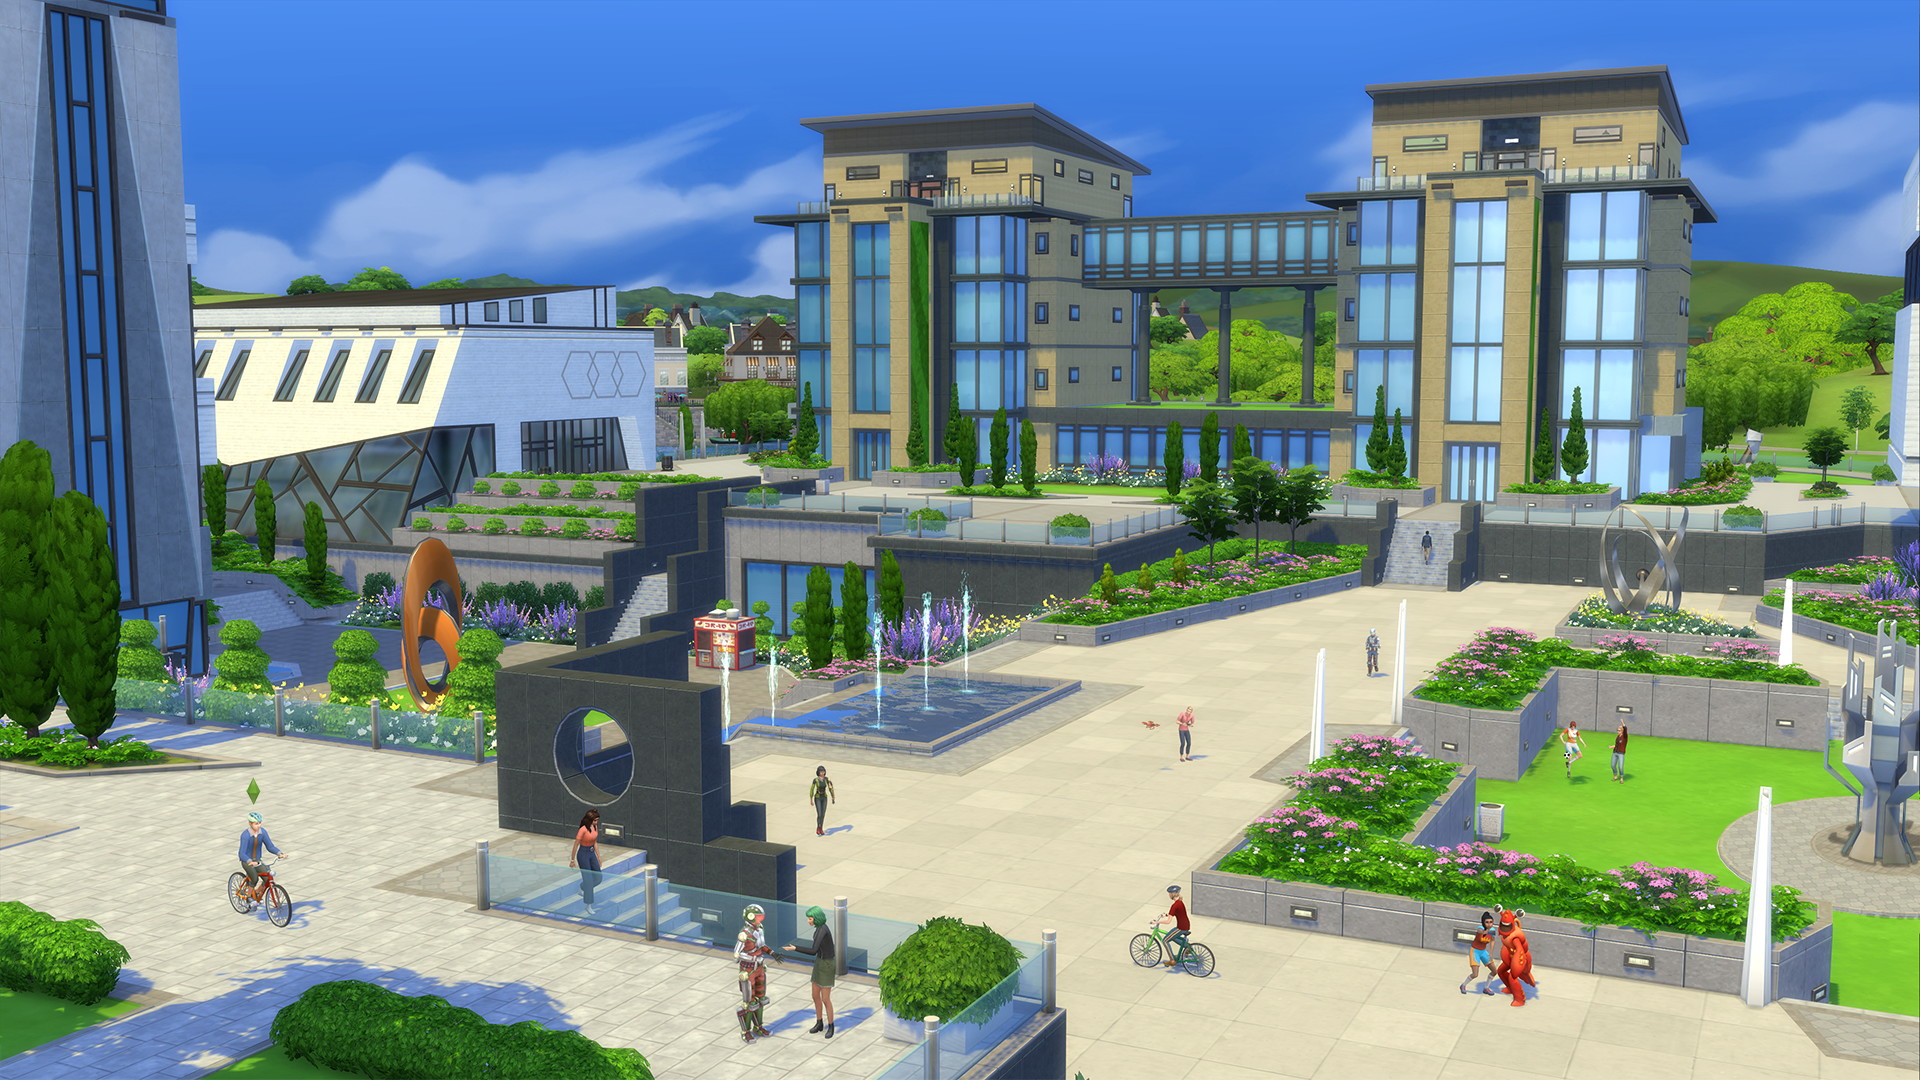 The Sims 4: Discover University - screenshot 3